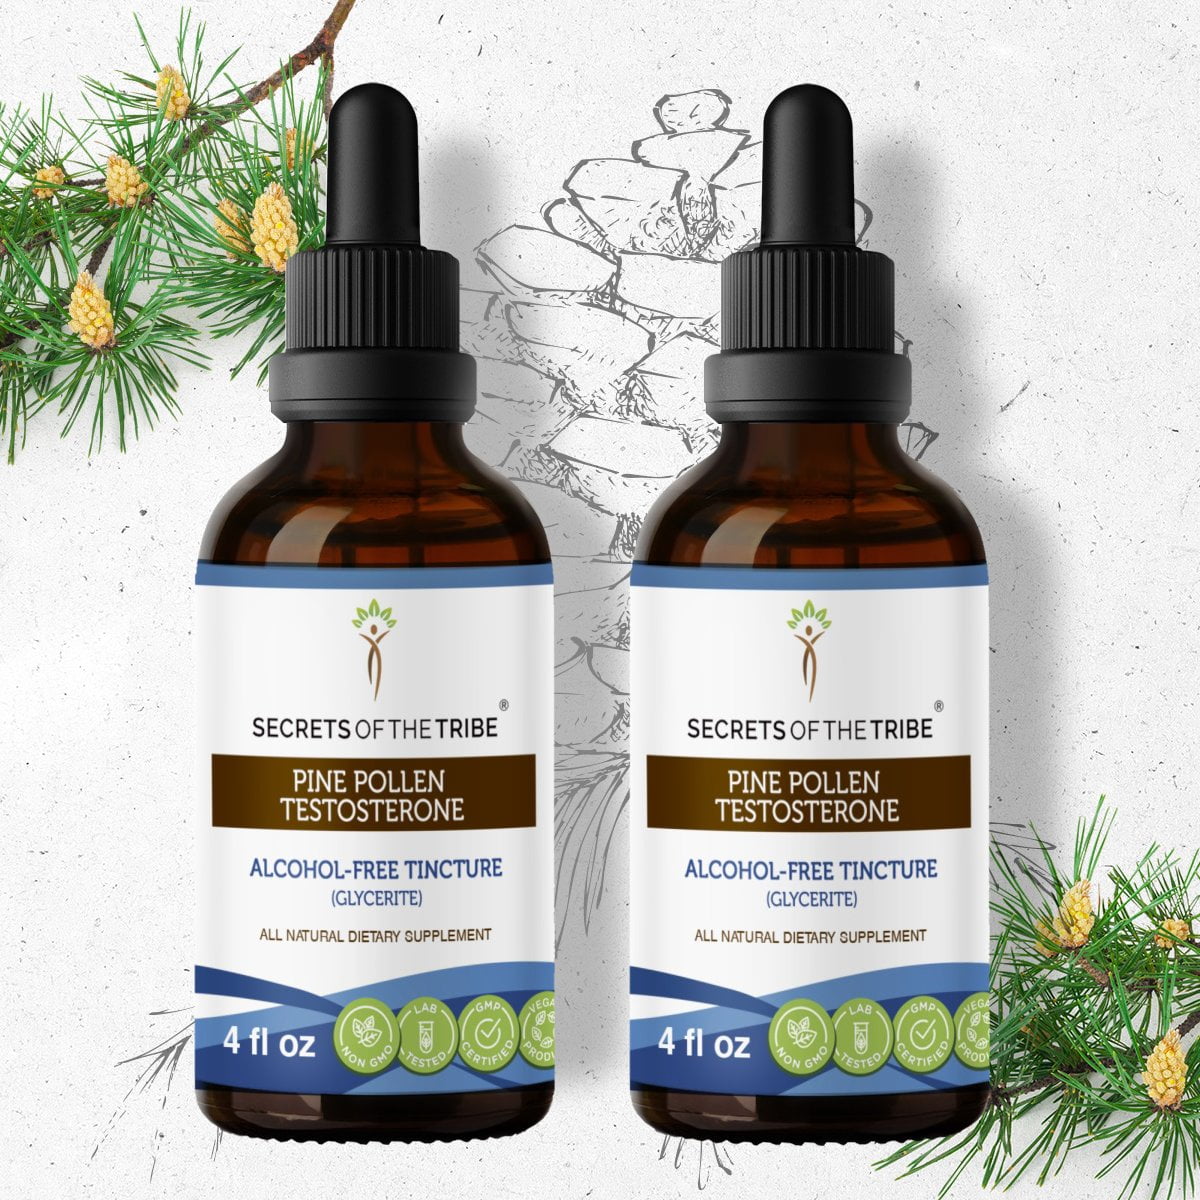 Pine Pollen Testosterone Tincture Alcohol-FREE Extract, Wildcrafted Pine  Pollen Scots Pine, Pinus sylvestris Sexual Wellness and General Health 2x4  oz 